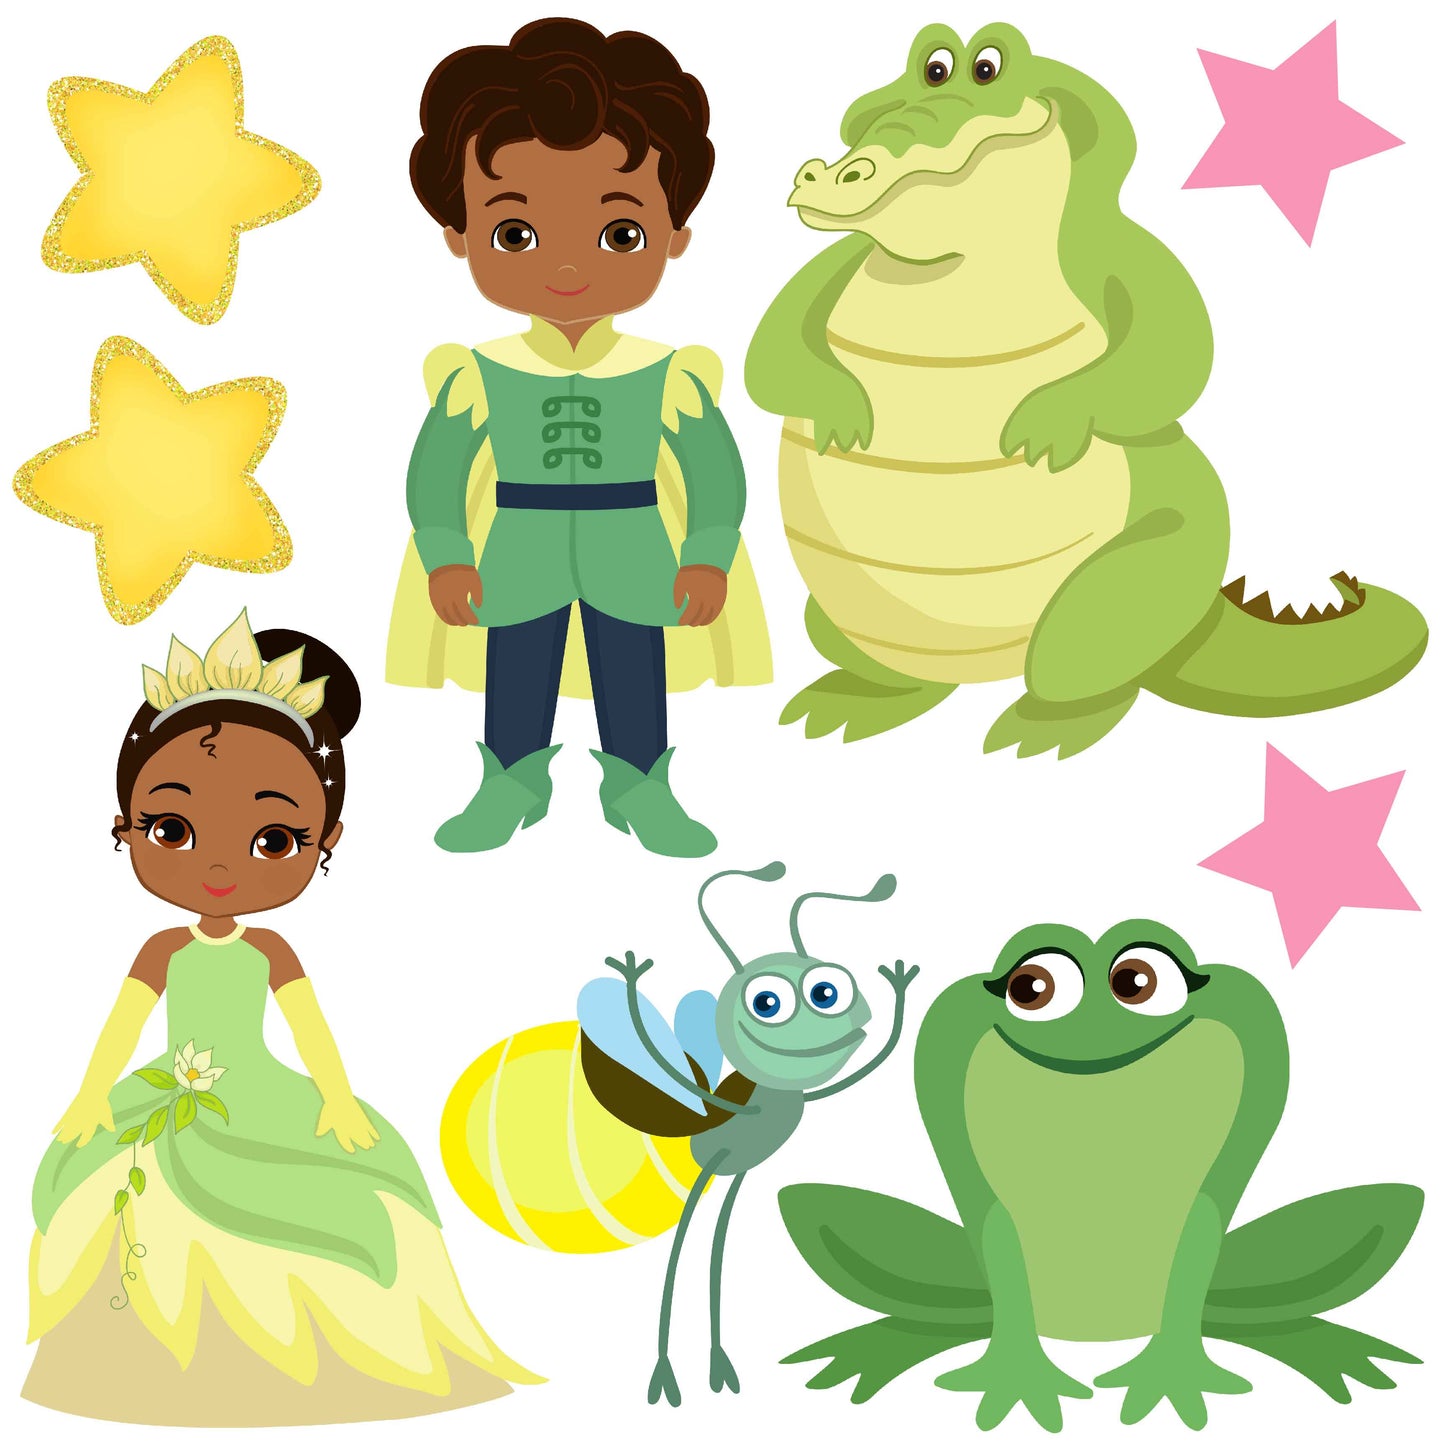 Princess and the Frog Half Sheet Misc. (Must Purchase 2 Half sheets - You Can Mix & Match)